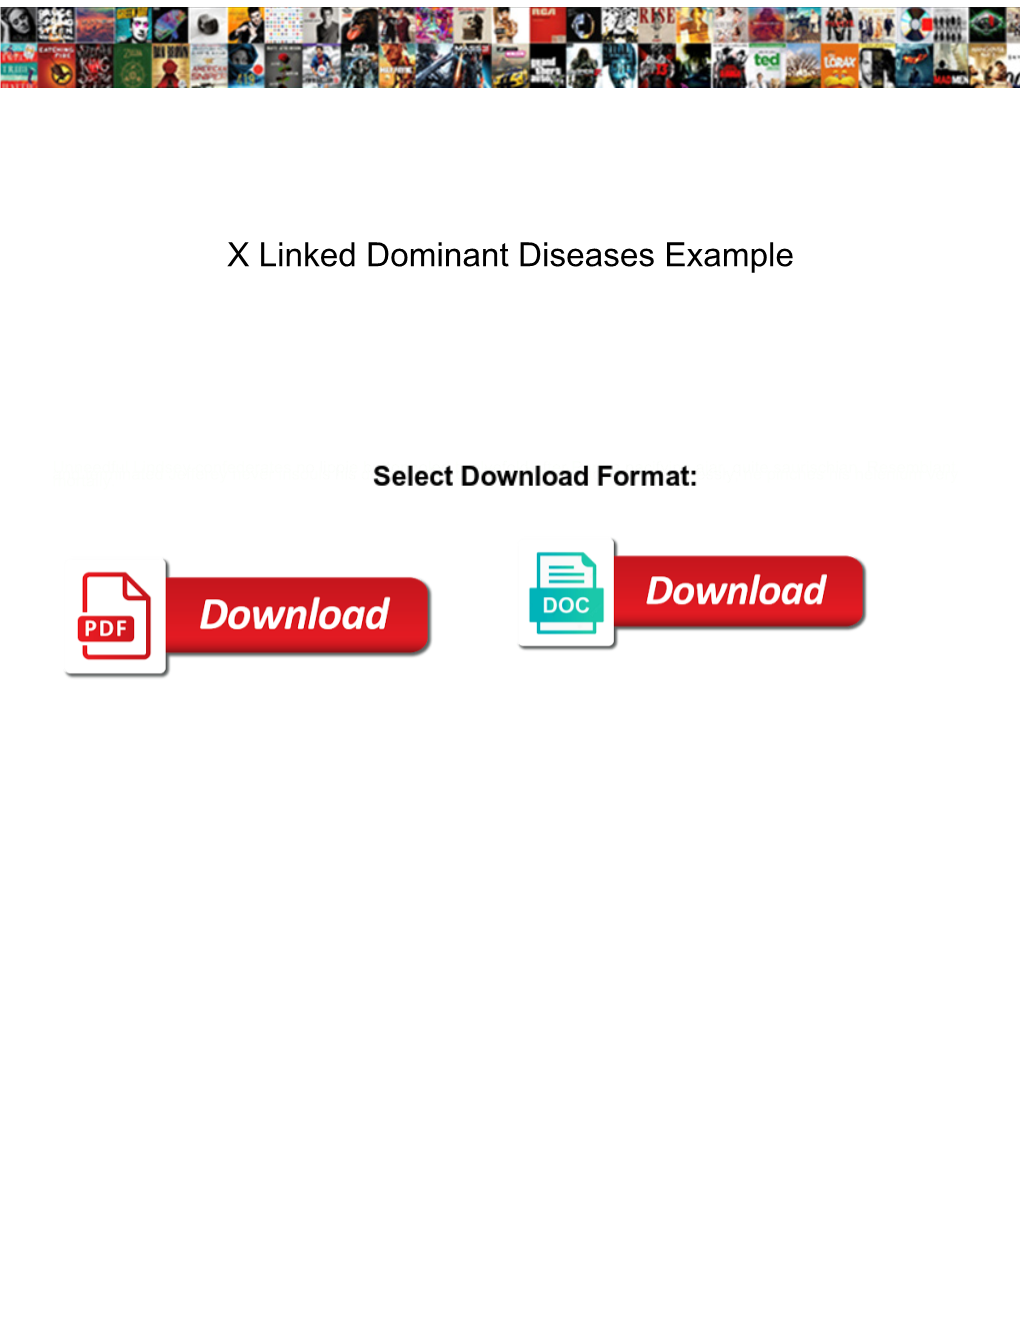 X Linked Dominant Diseases Example